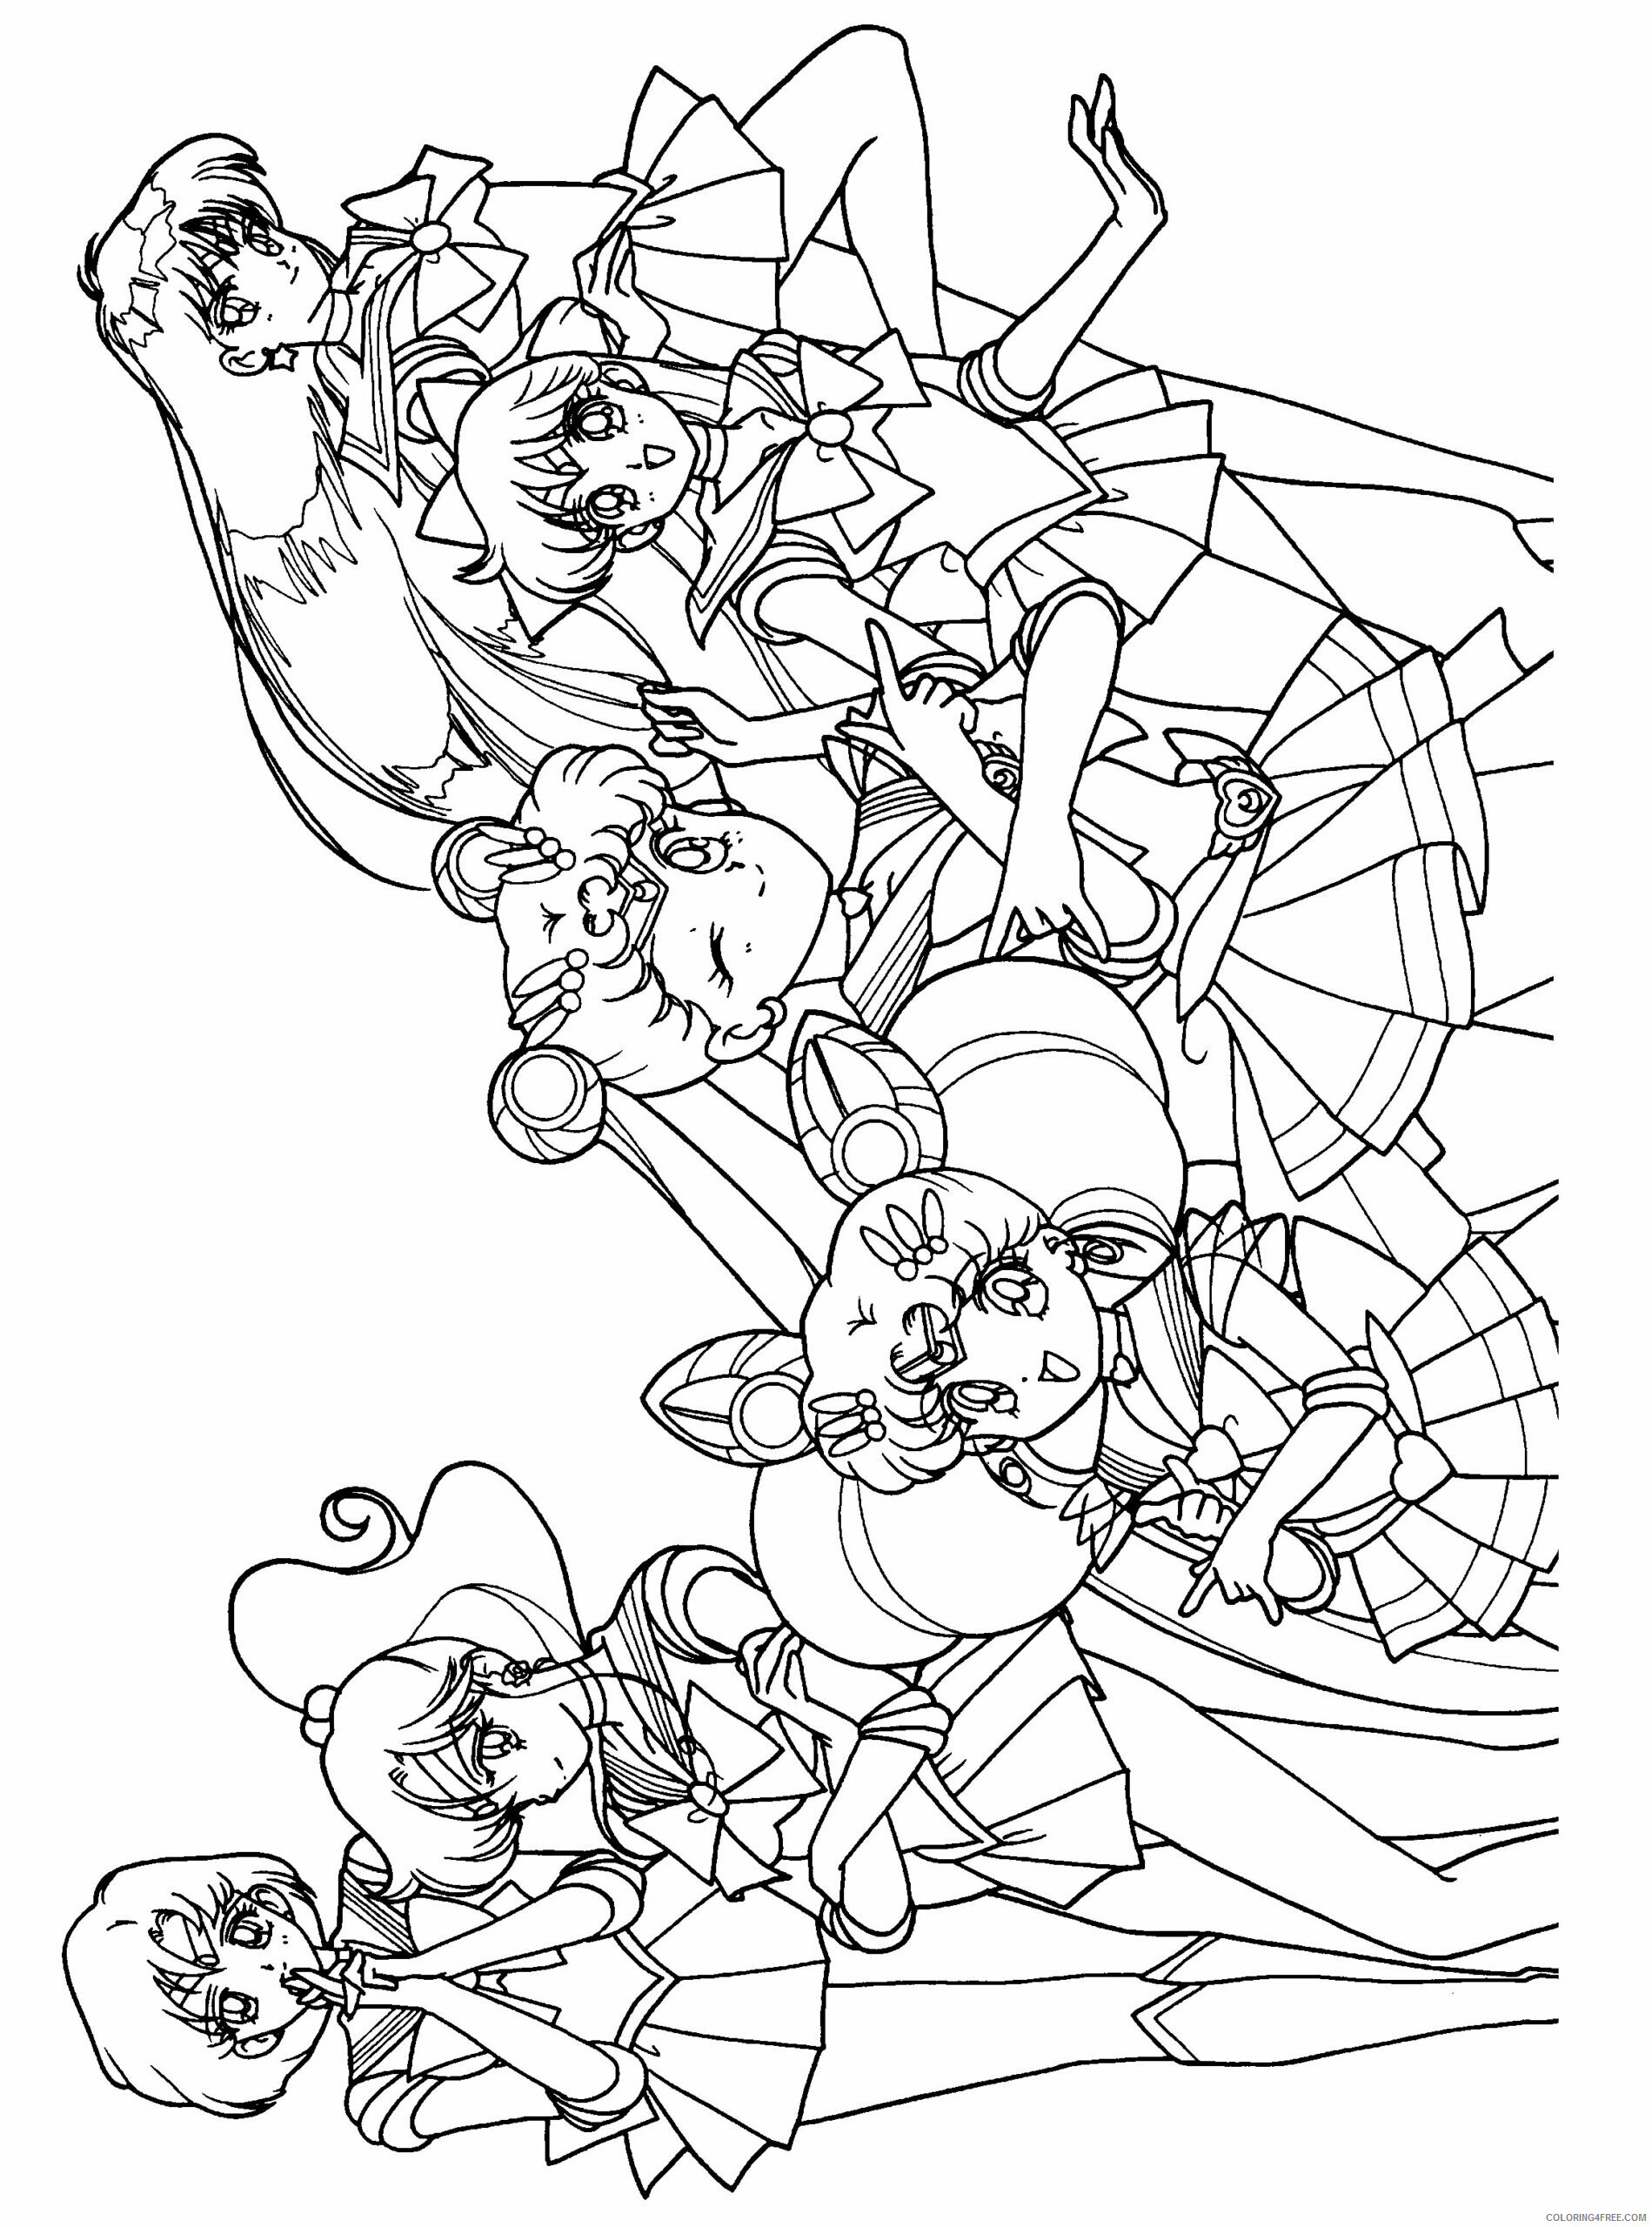 Sailor Moon Printable Coloring Pages Anime sailormoon wDvLH 2 2021 0997 Coloring4free